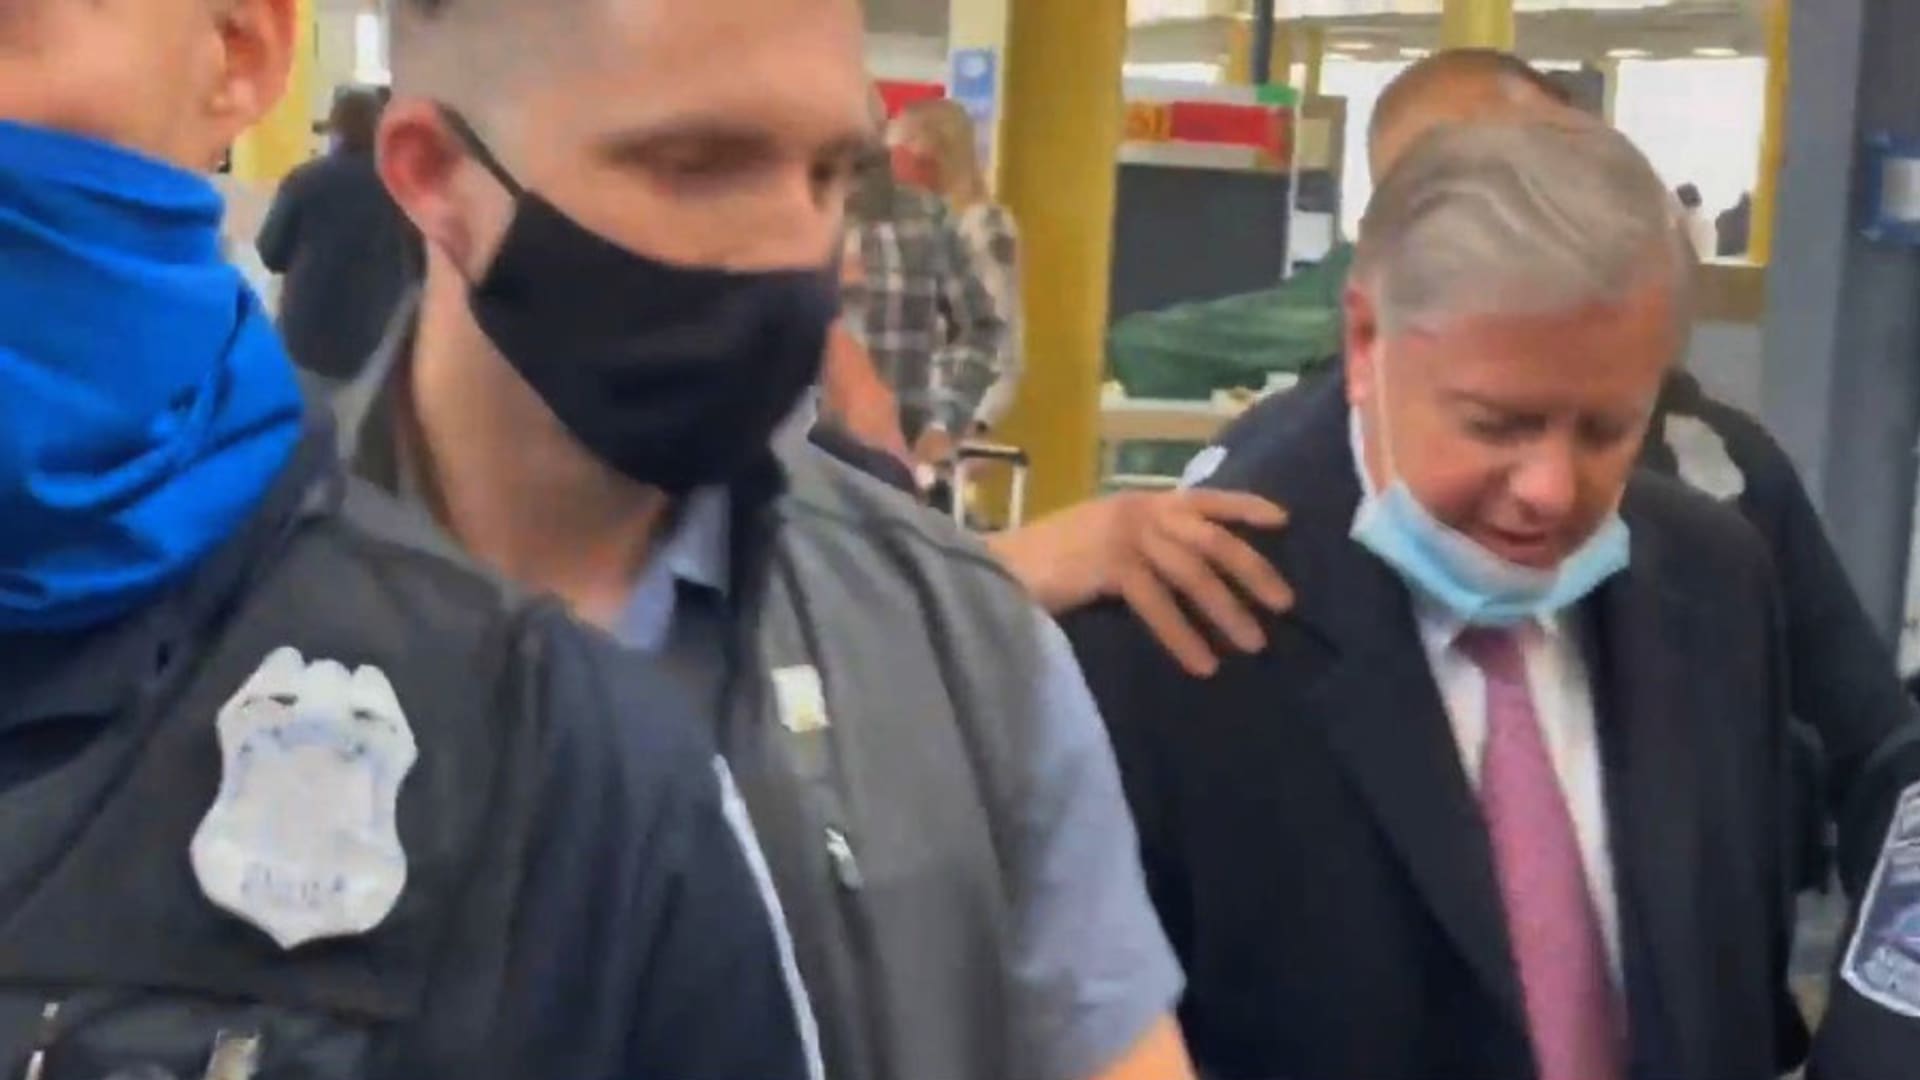 U.S. Senator Lindsey Graham is escorted by security personnel as Trump supporters berate him, at Reagan National Airport in Washington, U.S. January 8, 2021, in this still image obtained from a social media video. Courtesy of Oreo Express/Social